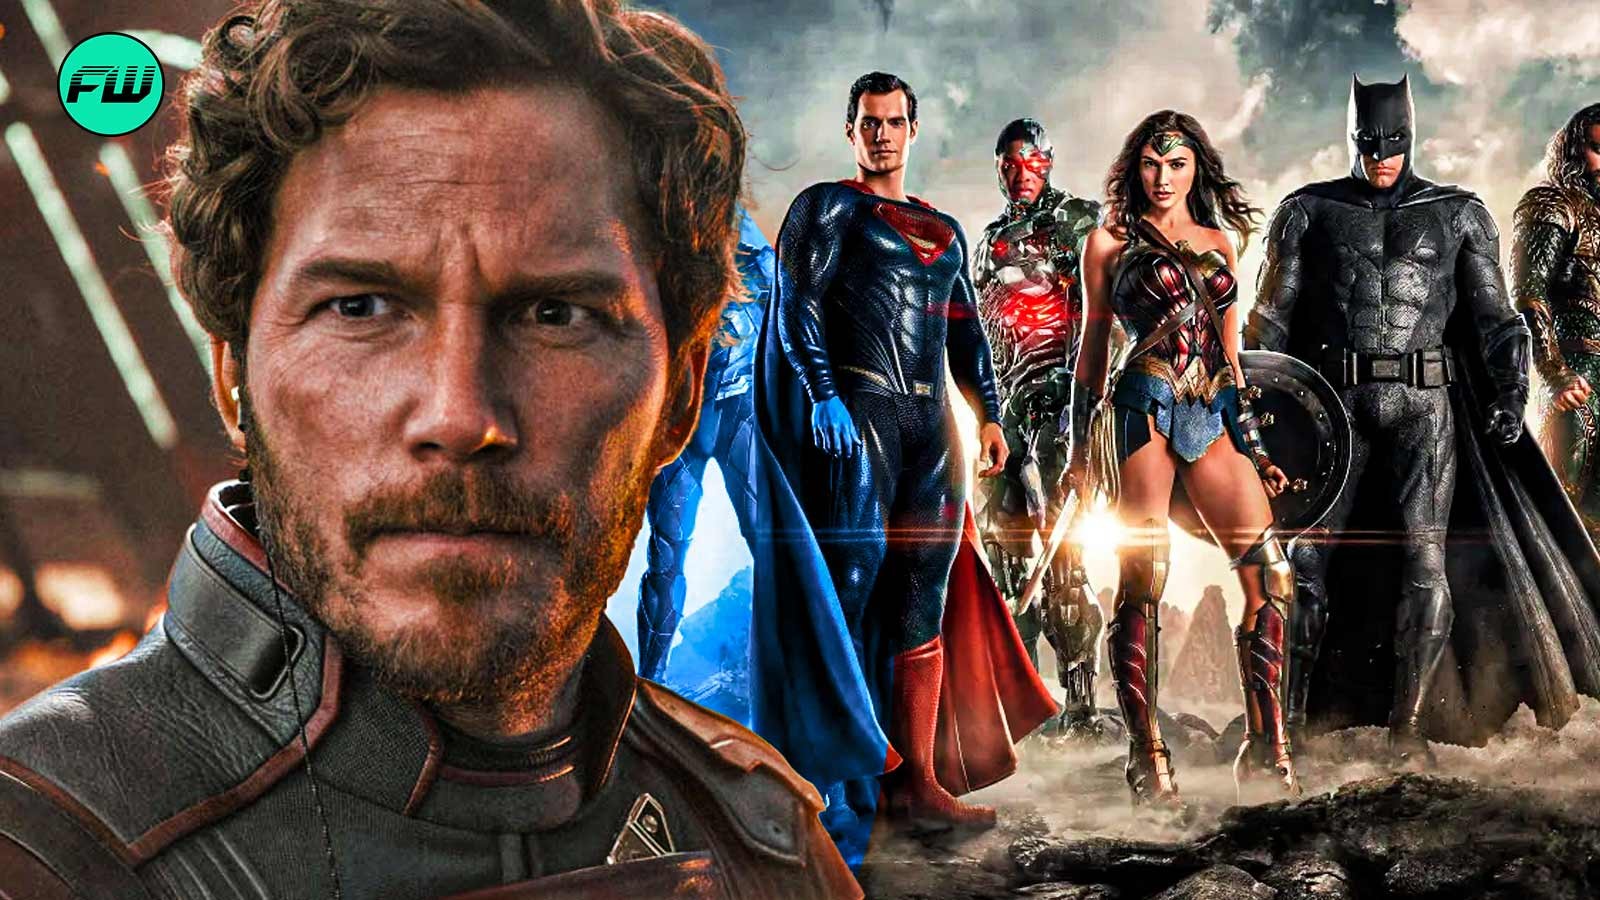 Chris Pratt still has a chance to be a Justice League hero after James Gunn’s comment on the upcoming DCU show